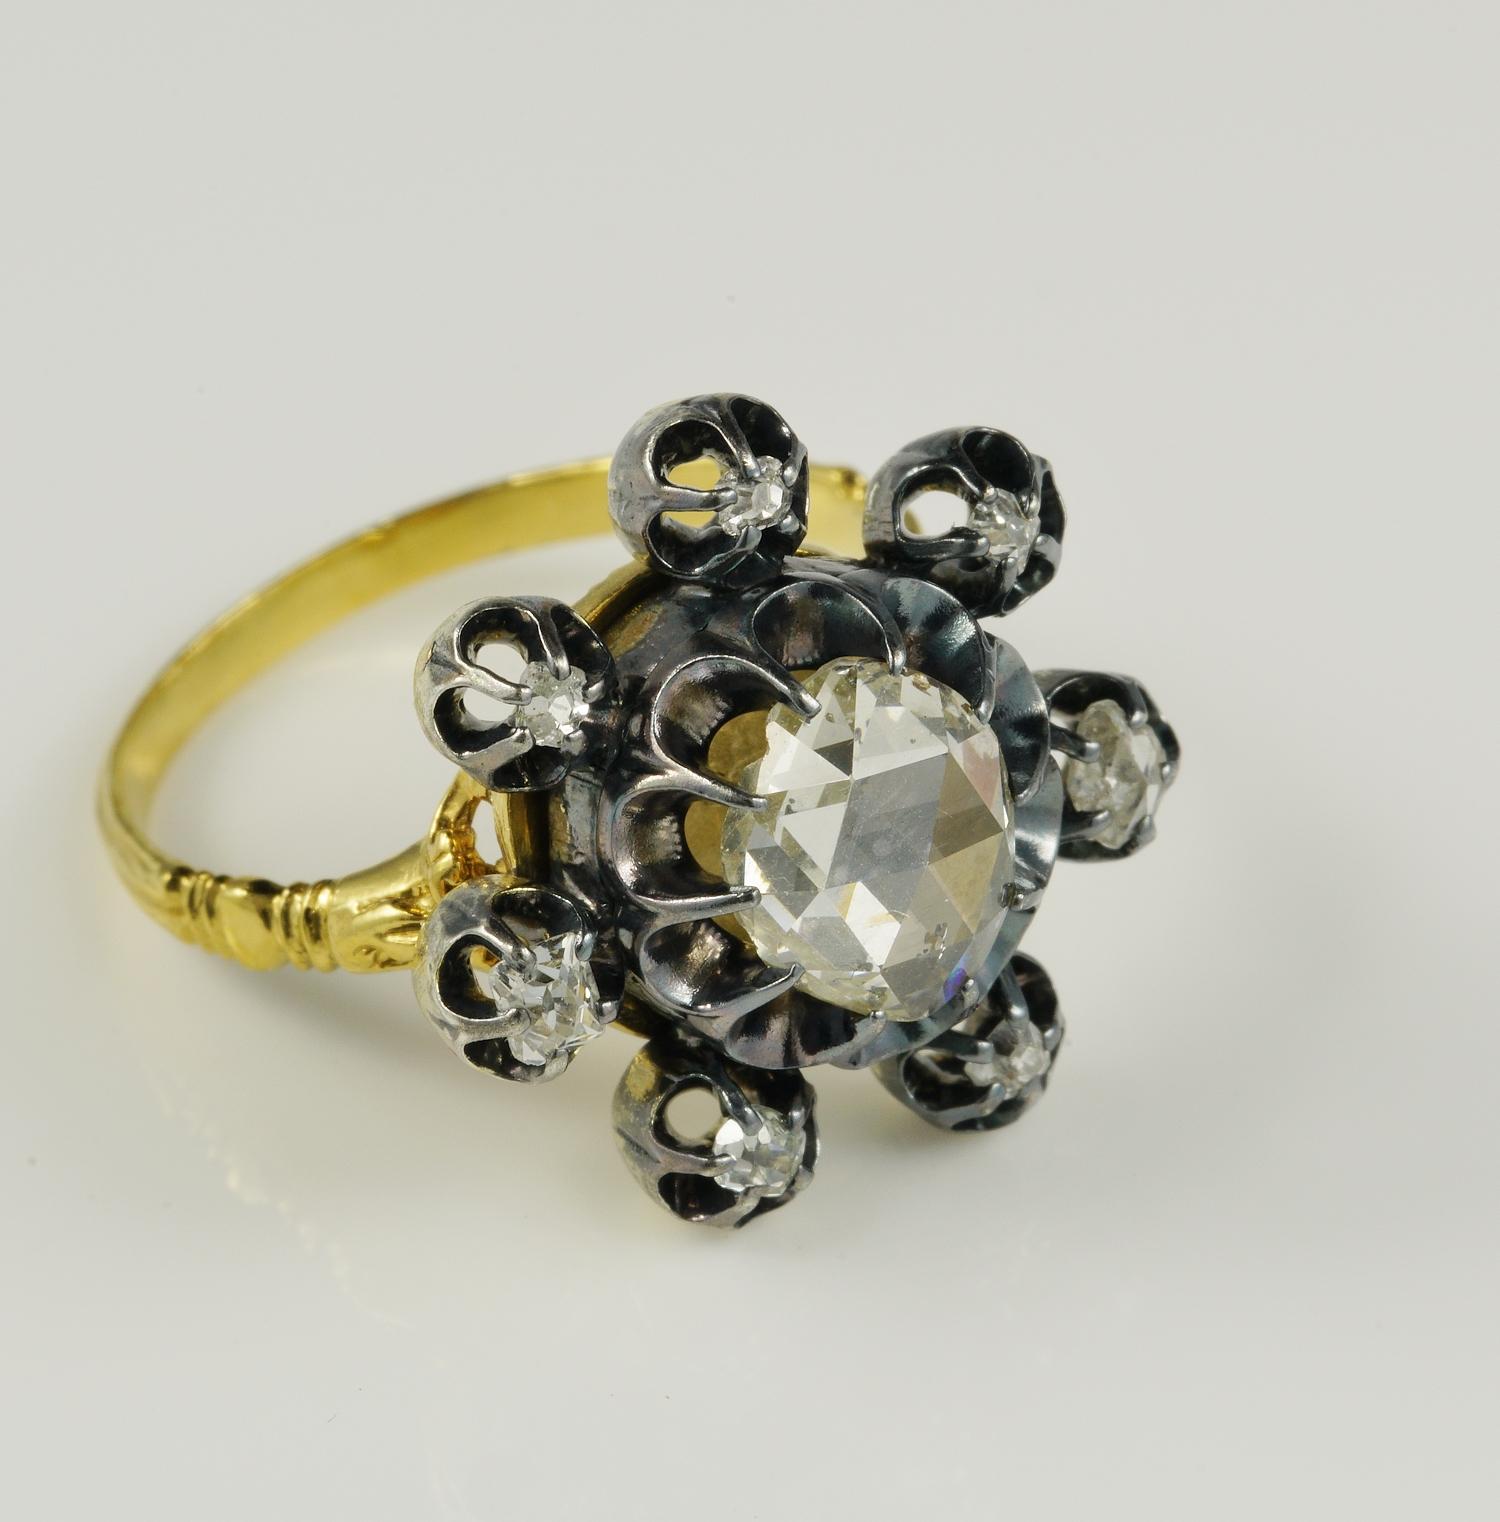 Jump to 1800!

This impressive Georgian period Diamond ring is an homage to woman beauty and grace

Large effective flower head, very much in vogue during the Georgian era, has been exquisitely made of solid 19/20 KT tested topped by silver
The